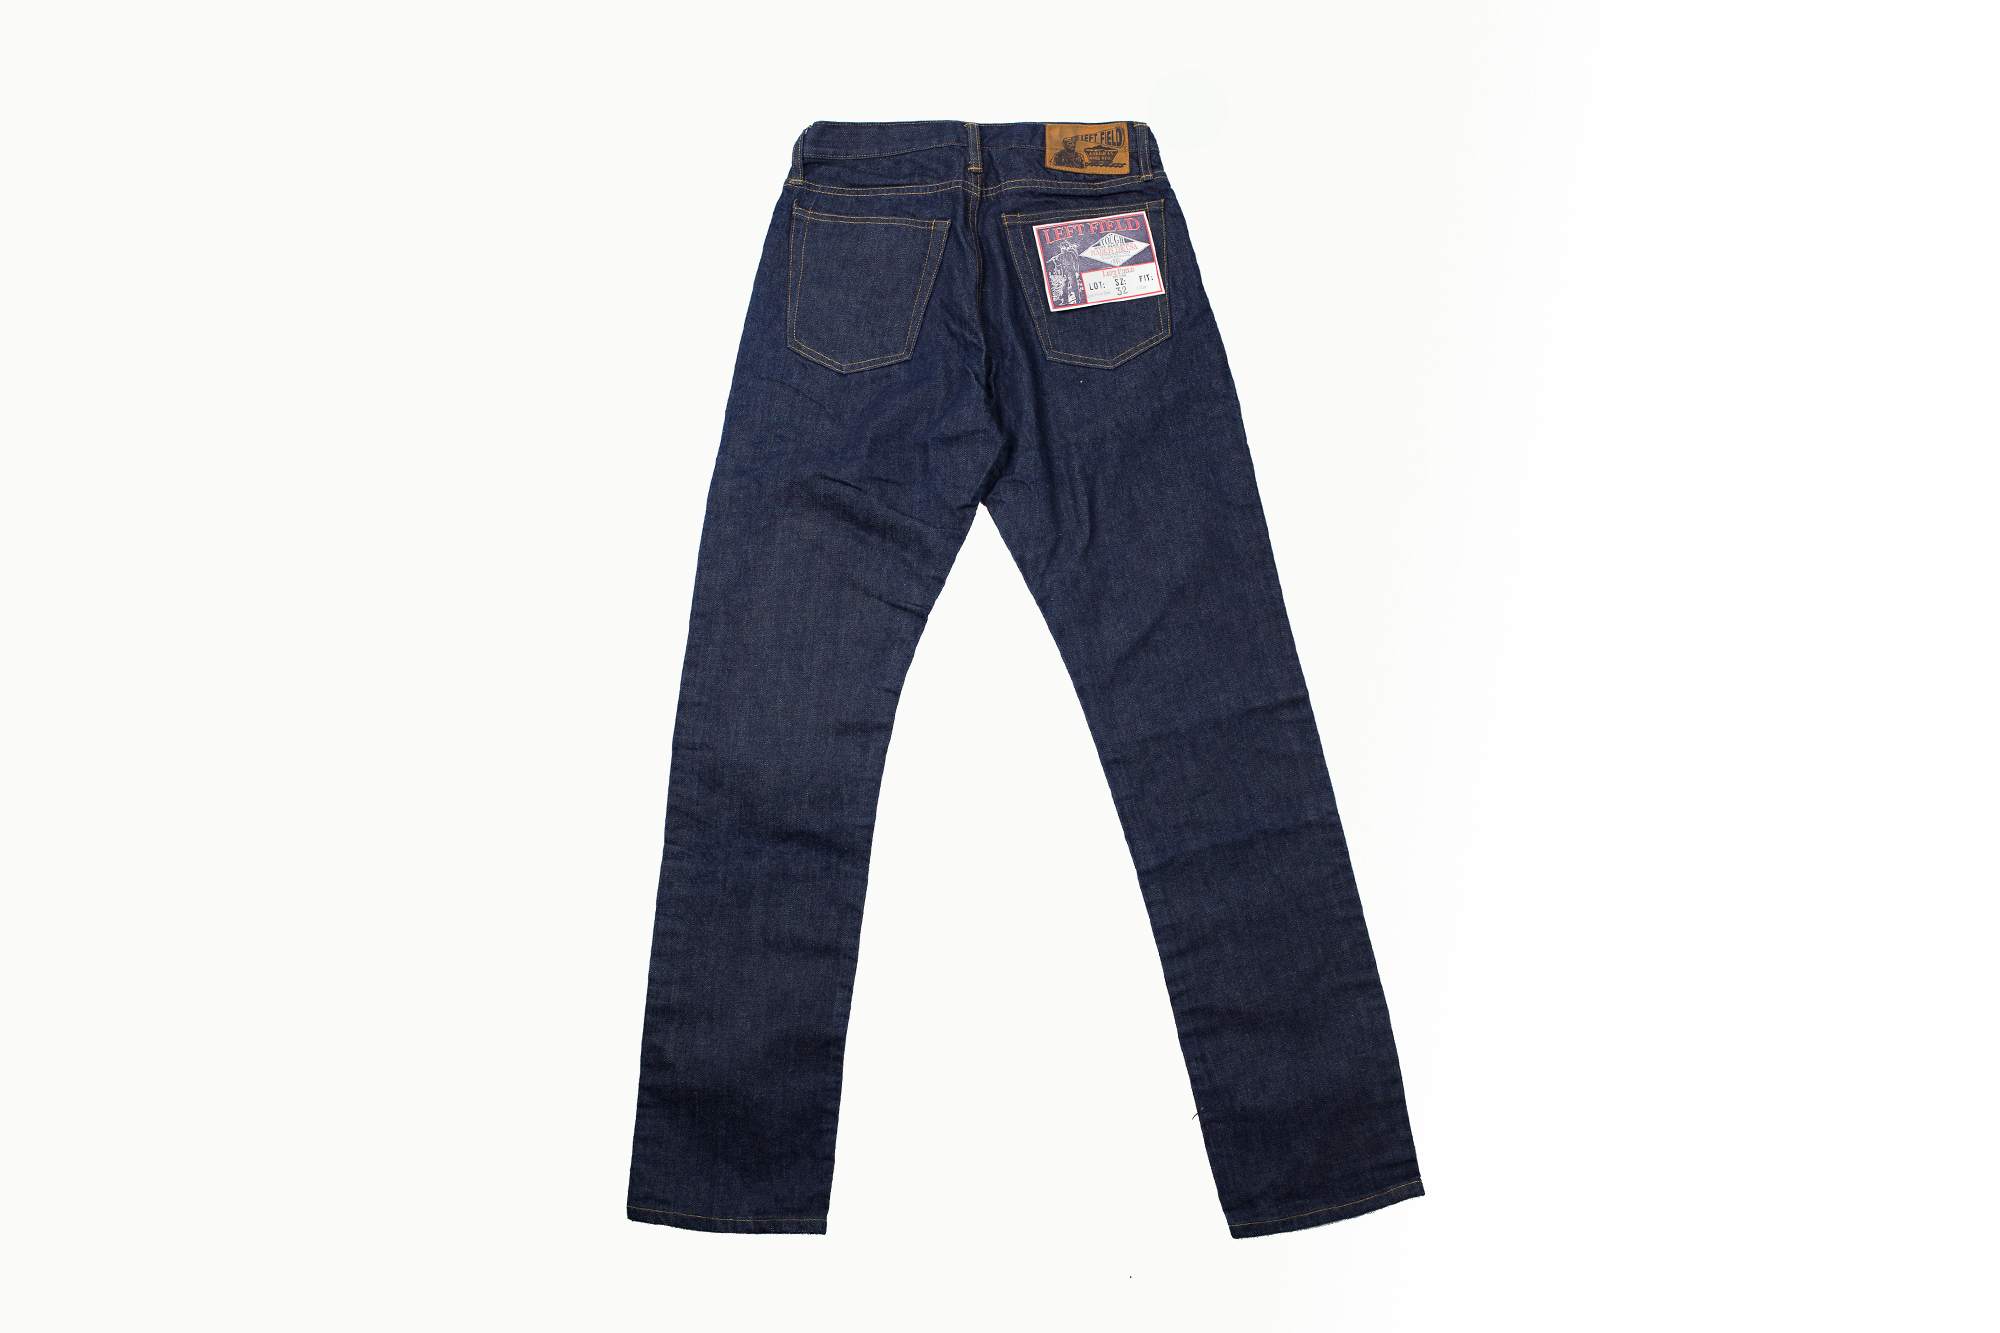 Left Field’s New Jeans Are a Non-Selvedge White Oak Steal